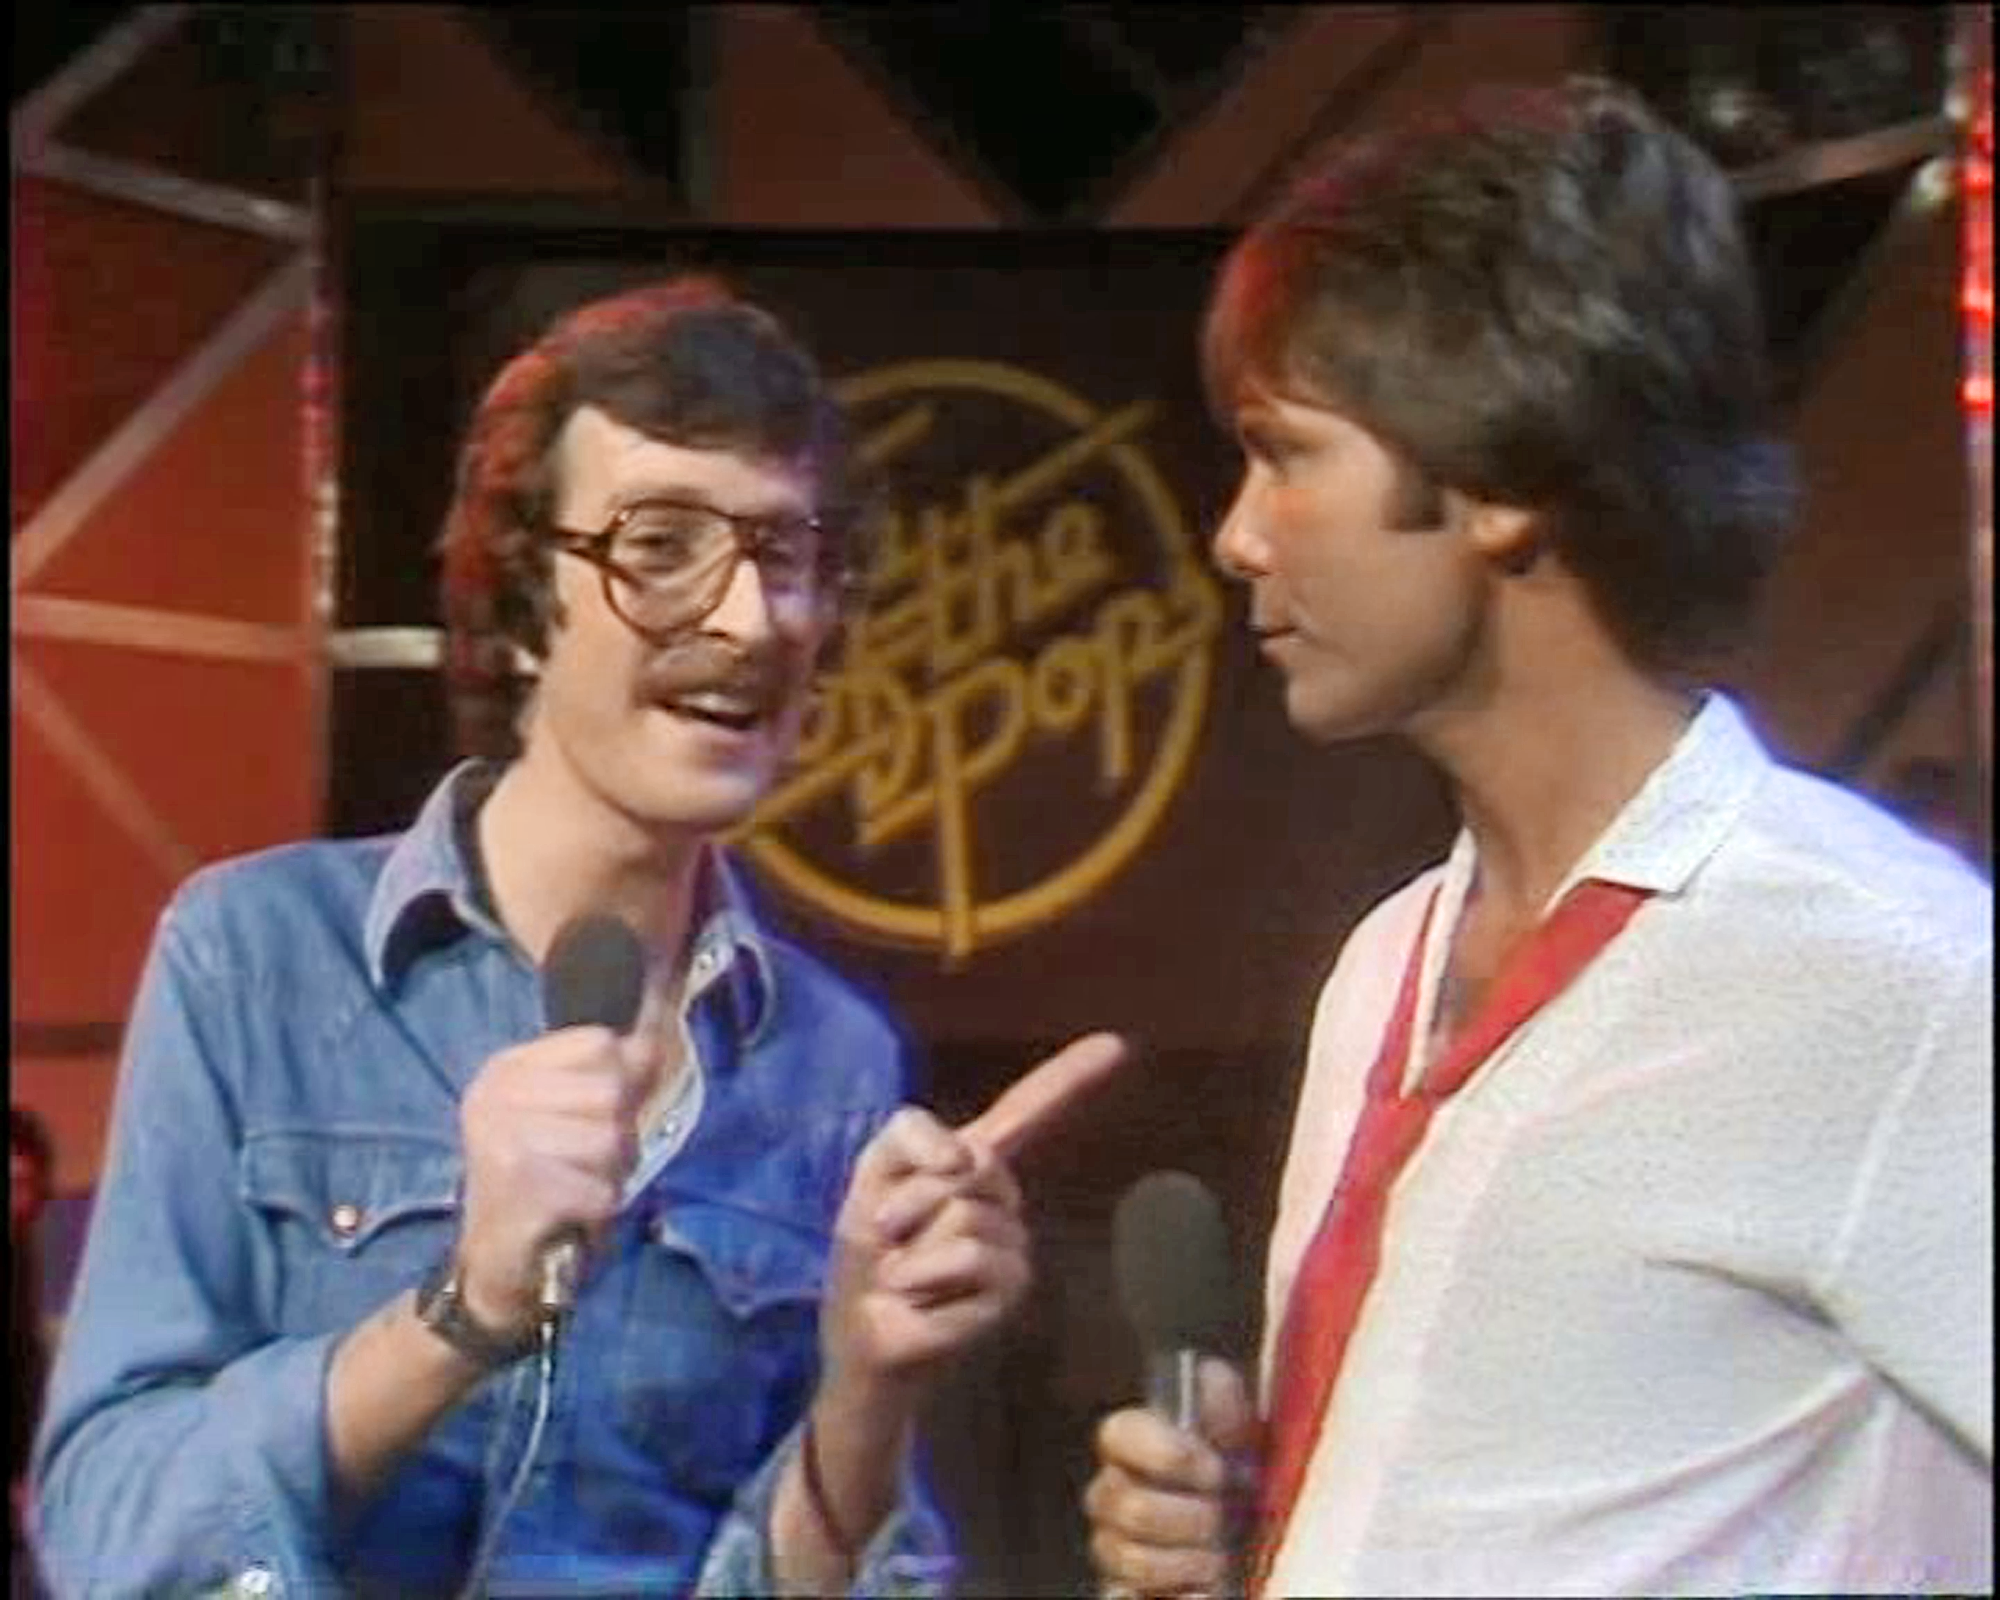 Steve mit Cliff Richard bei Top Of The Pops